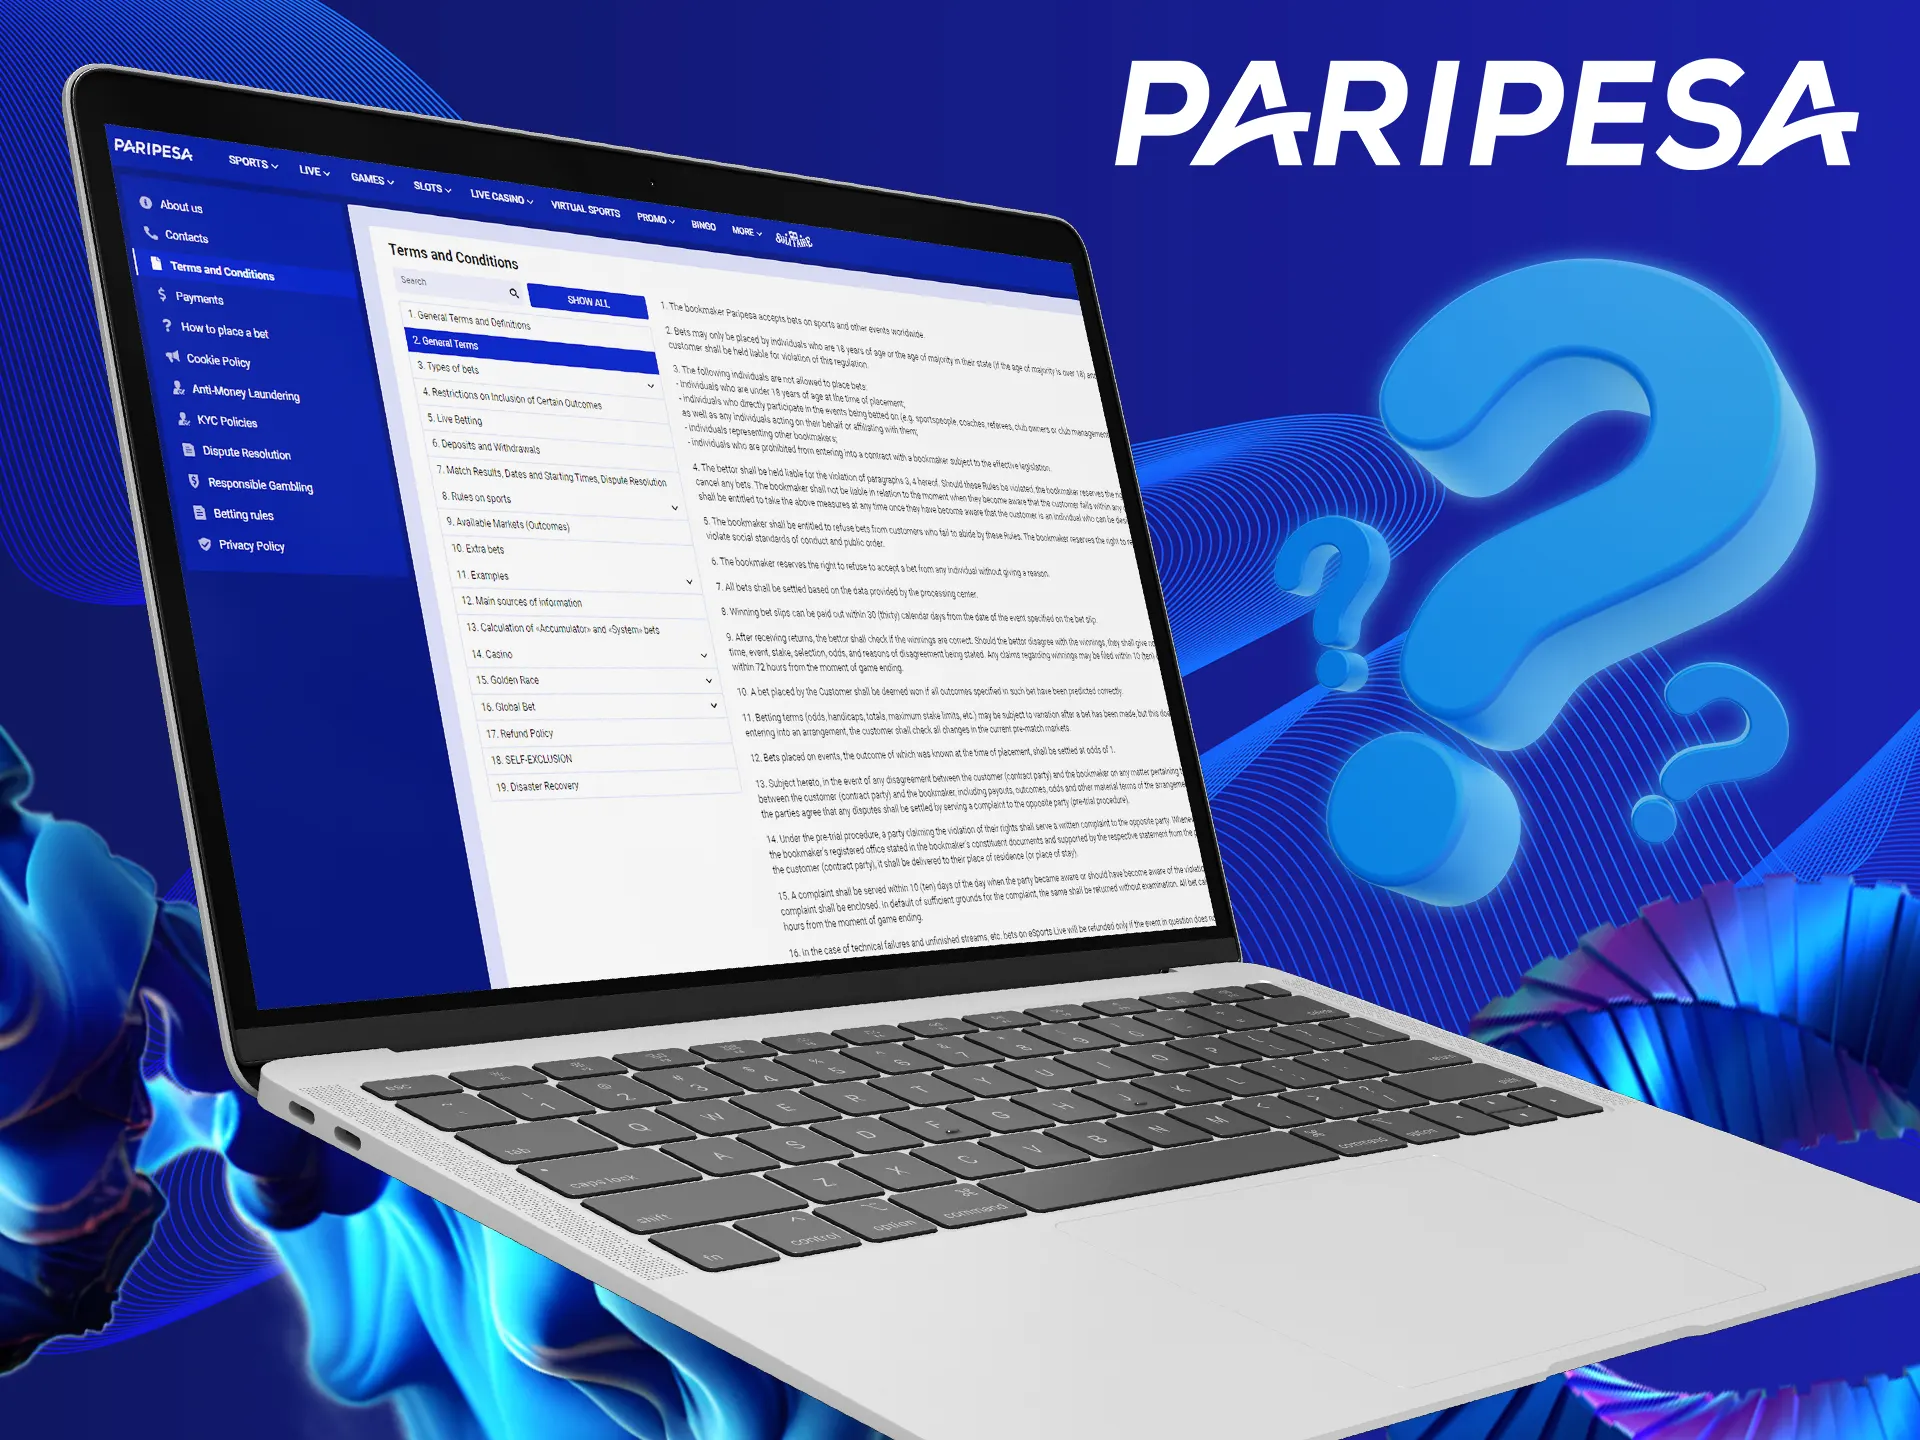 Read the rules of the Paripesa website before making a new account.